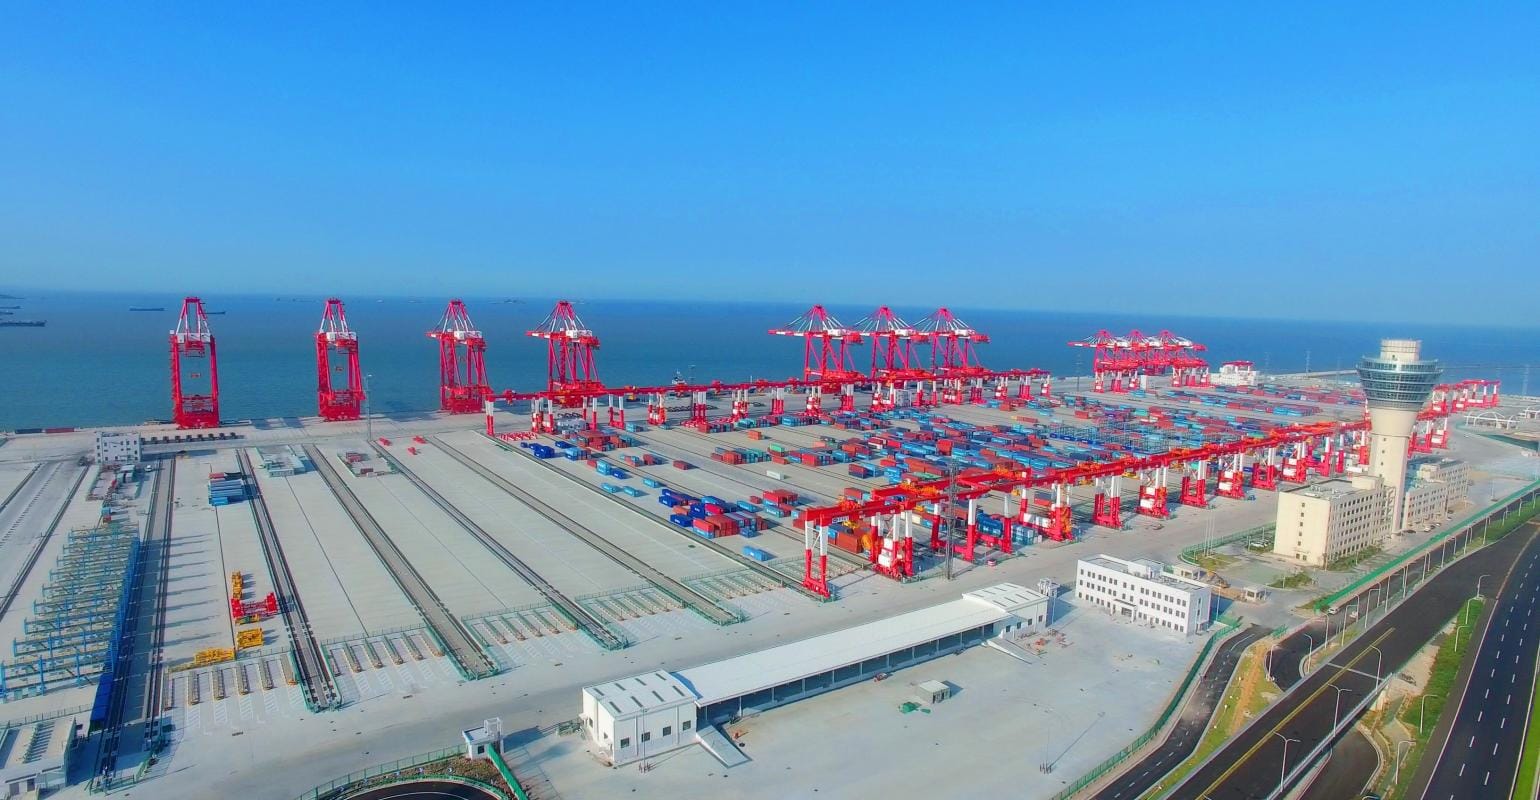 Container volume at major Chinese ports declined 8.9% in Q1